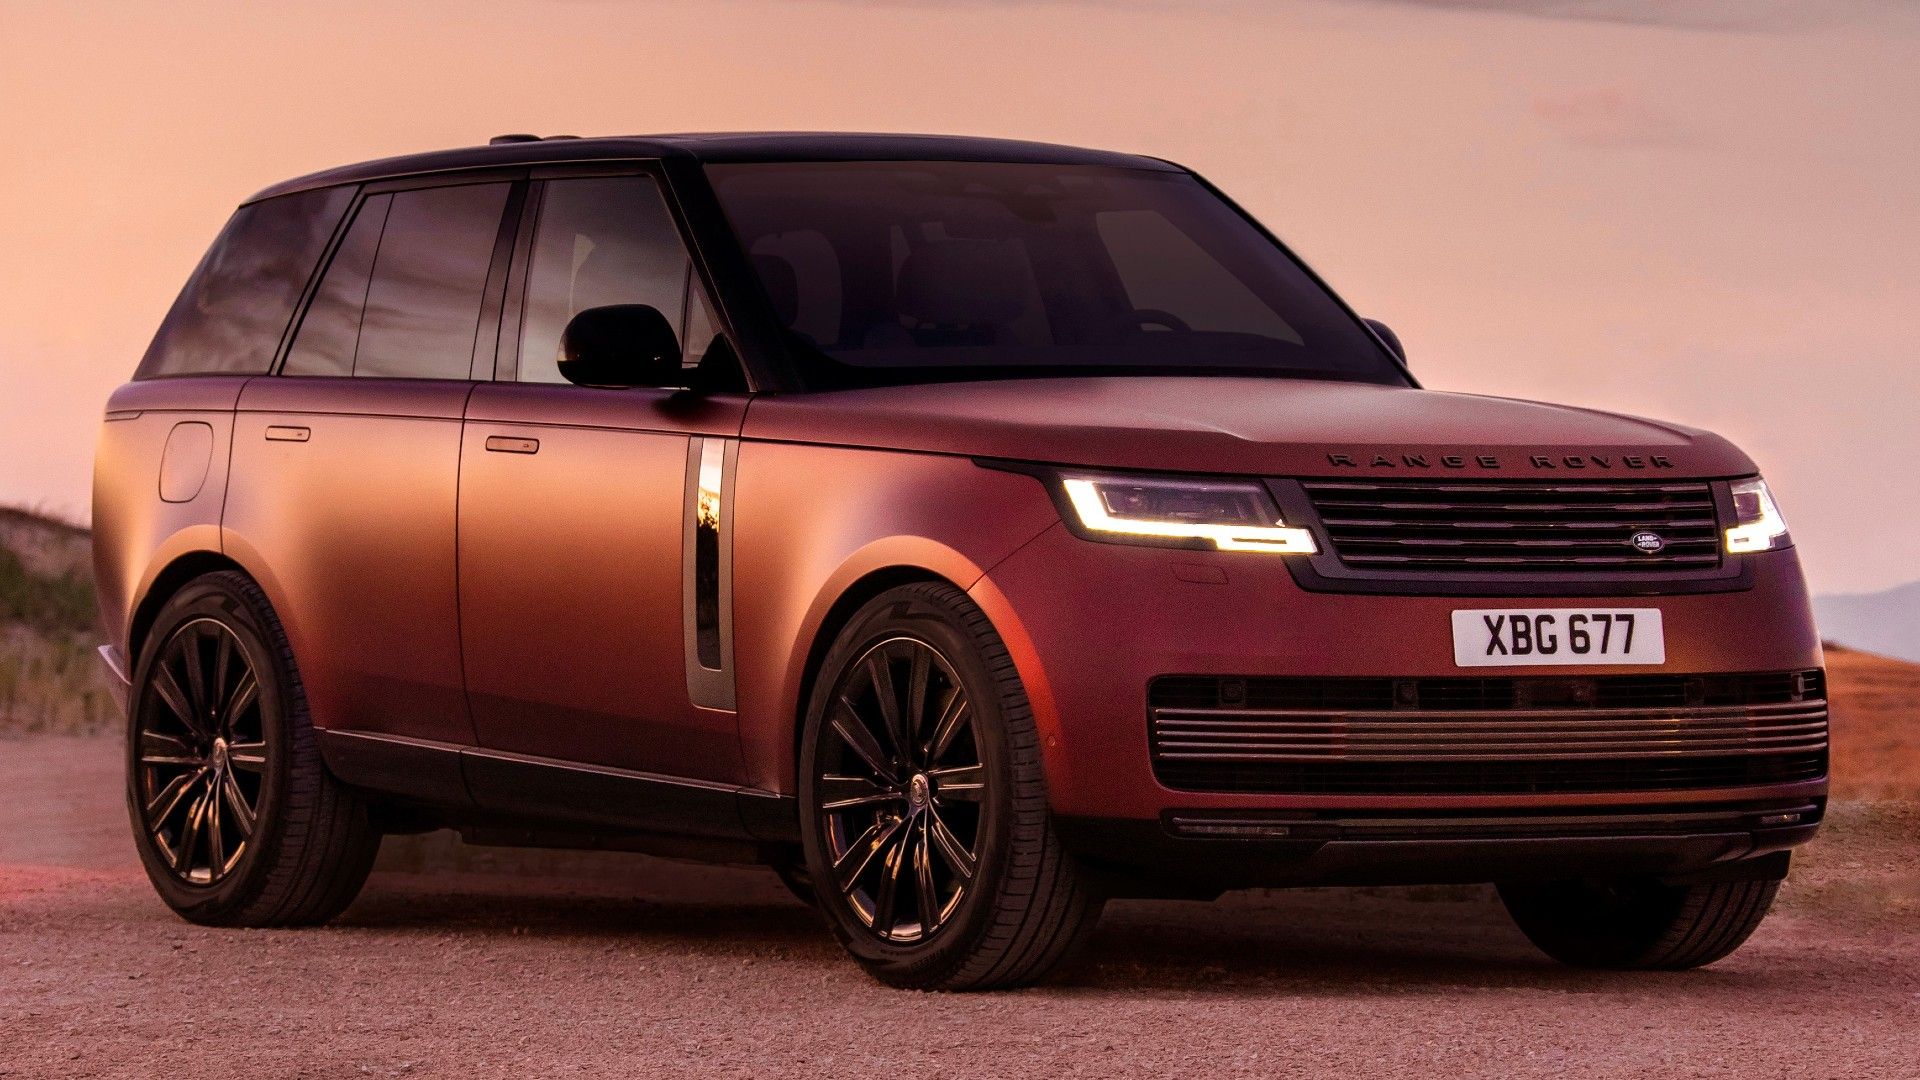 10 Things To Know About The Land Rover Range Rover Plug-in Hybrid